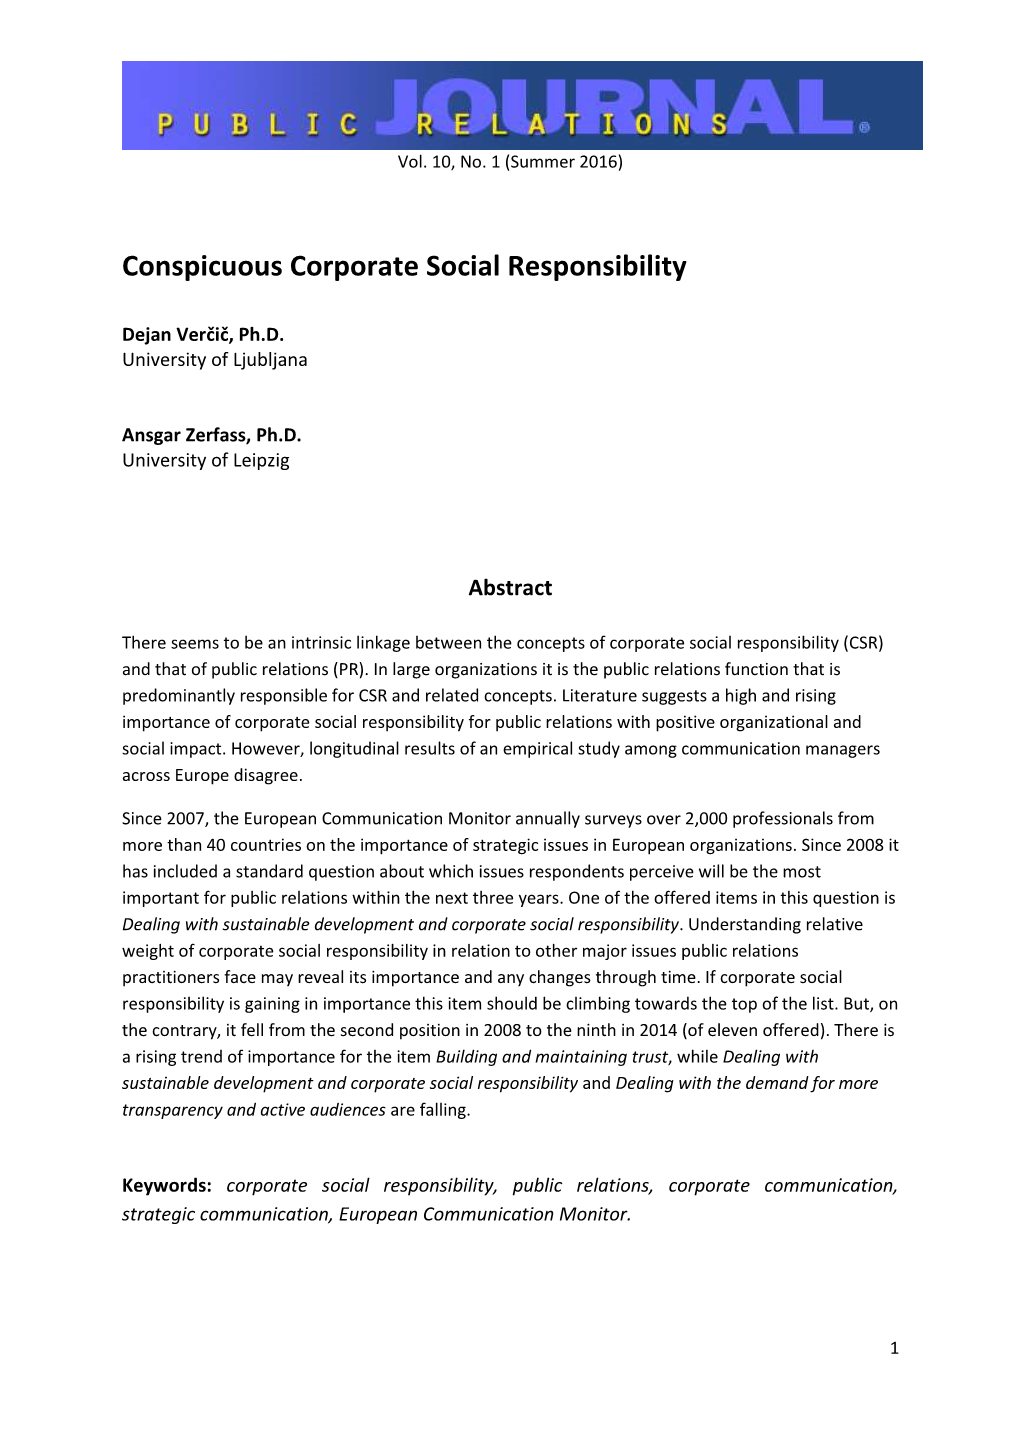 Conspicuous Corporate Social Responsibility